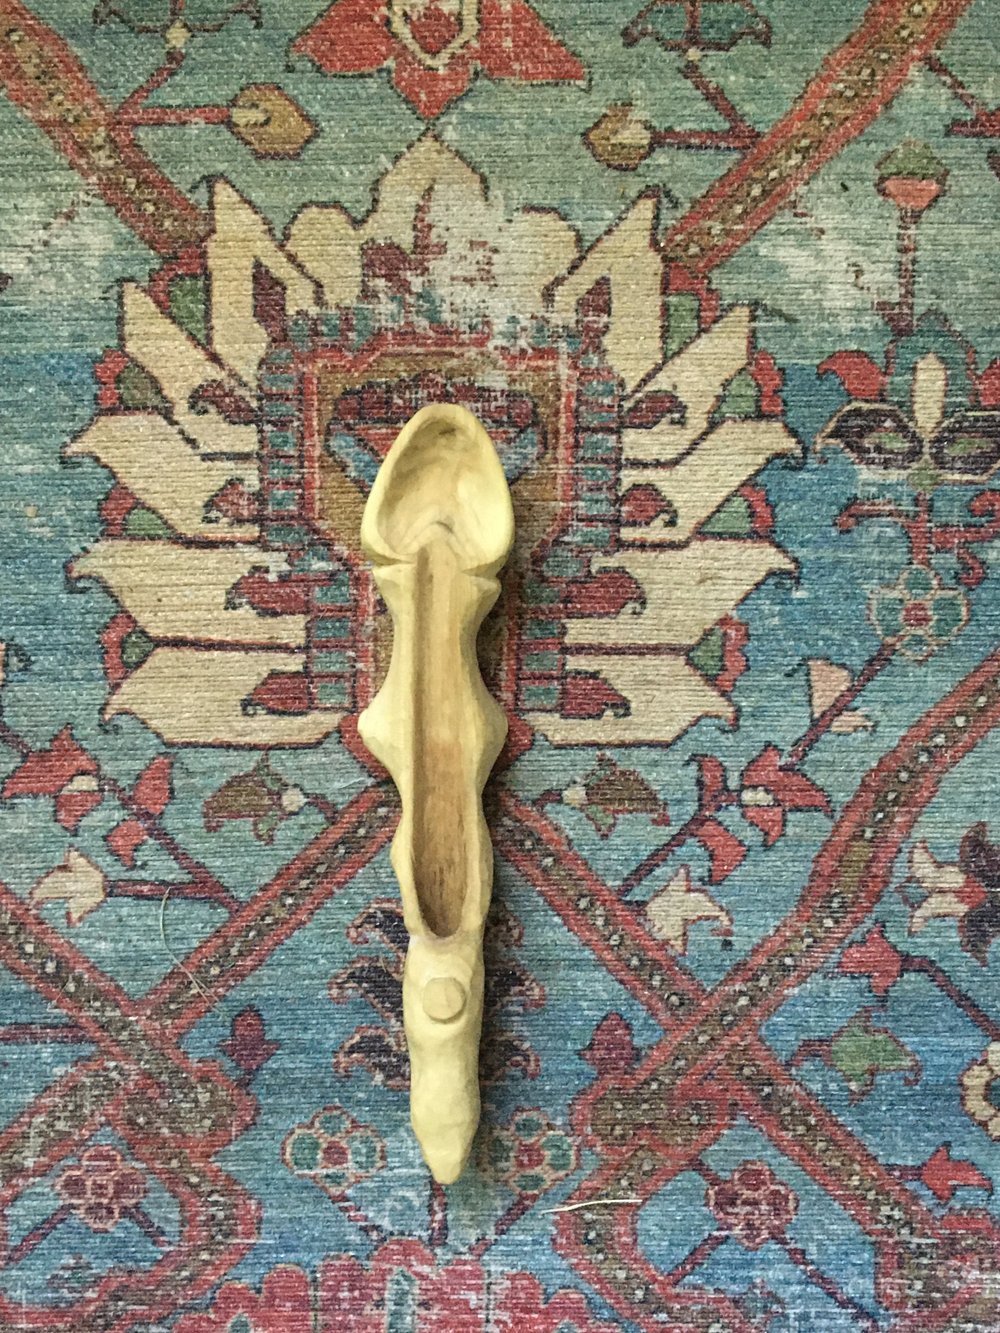 A ceremonial spoon to connect my with my ancestors, that Robin carved for me.